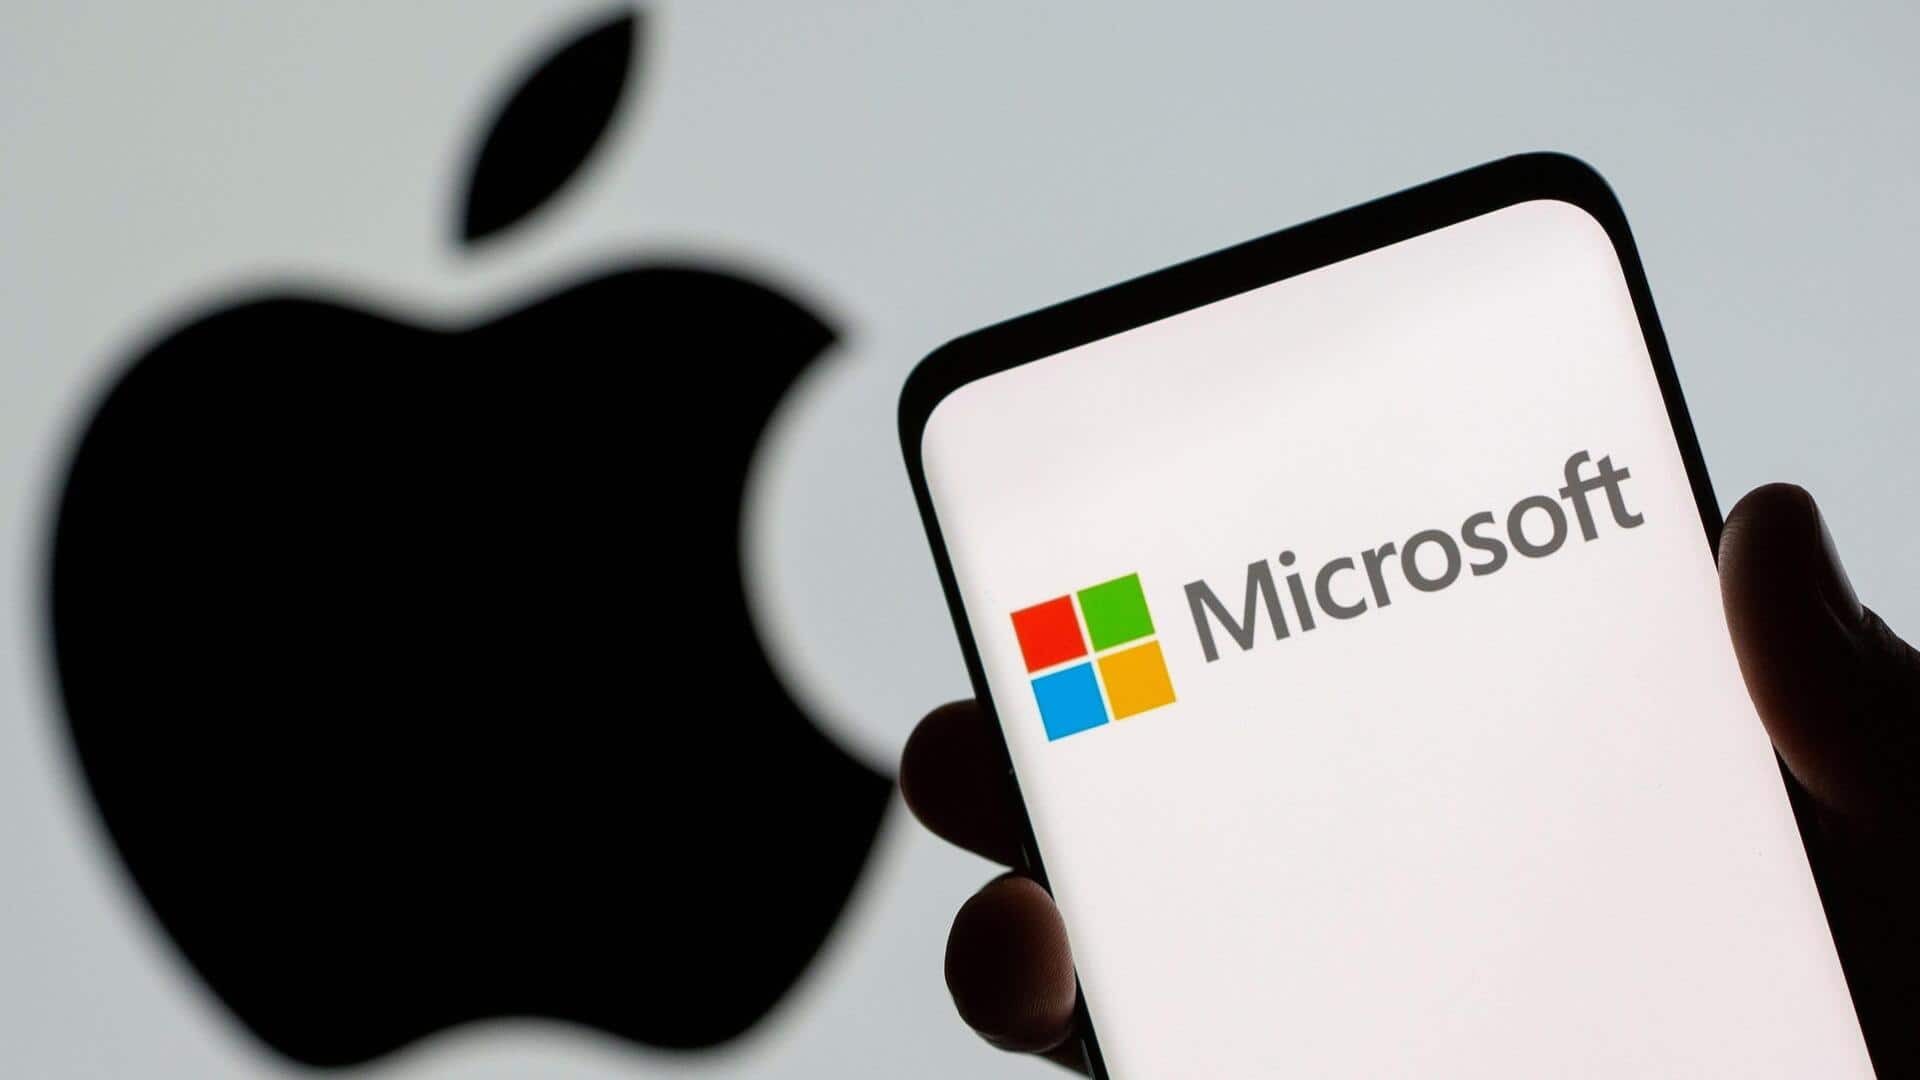 With AI dominance, Microsoft to beat Apple in market value